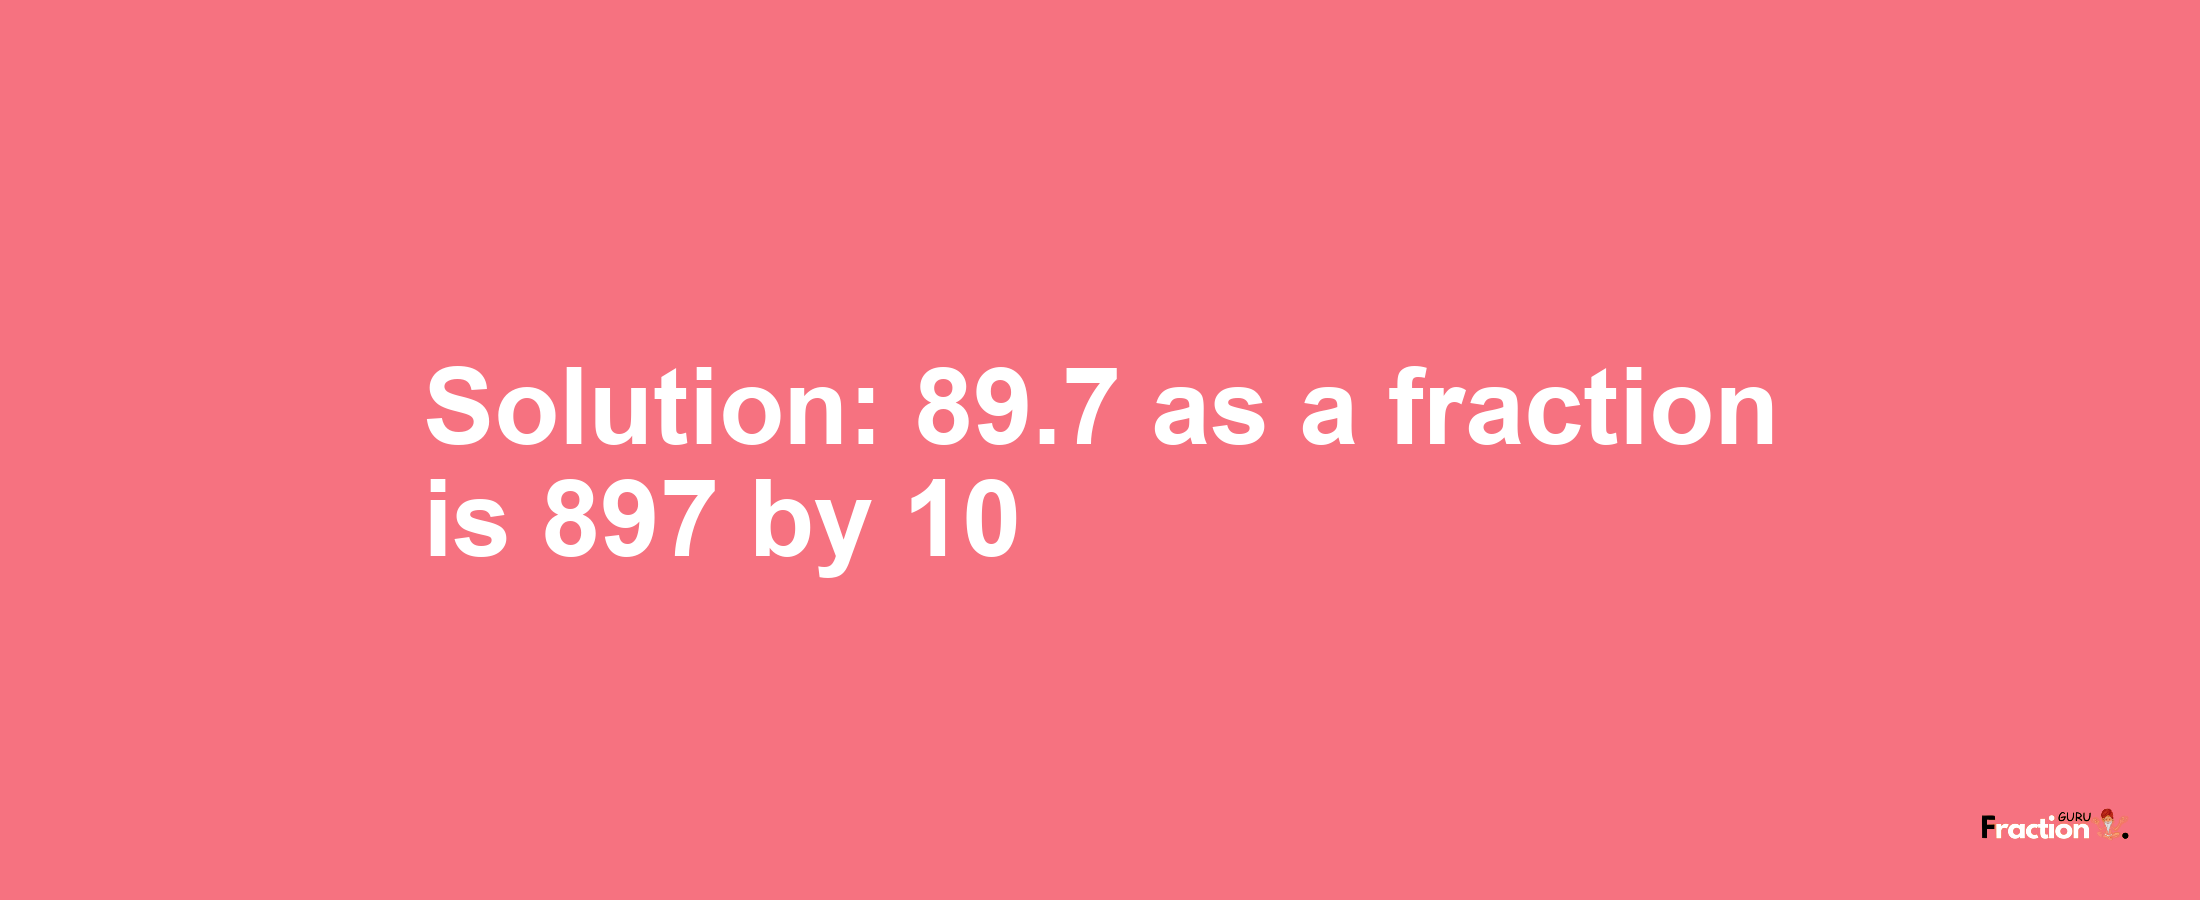 Solution:89.7 as a fraction is 897/10